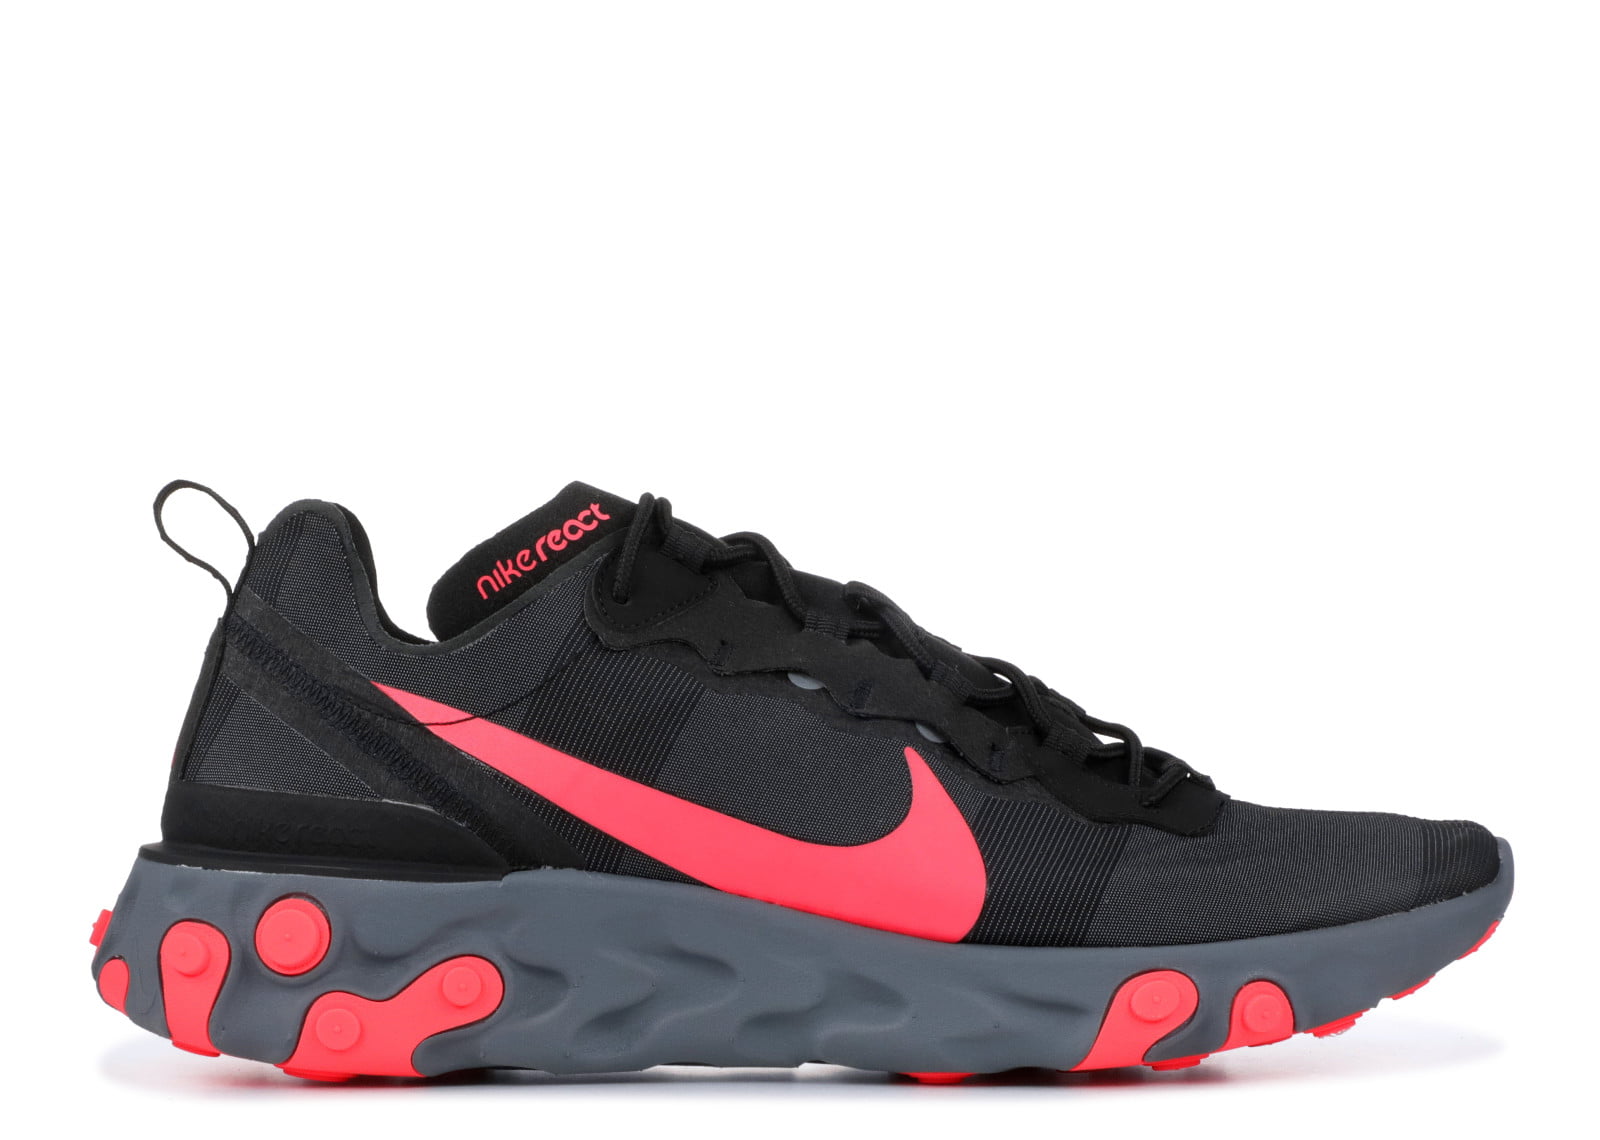 nike react element black and red